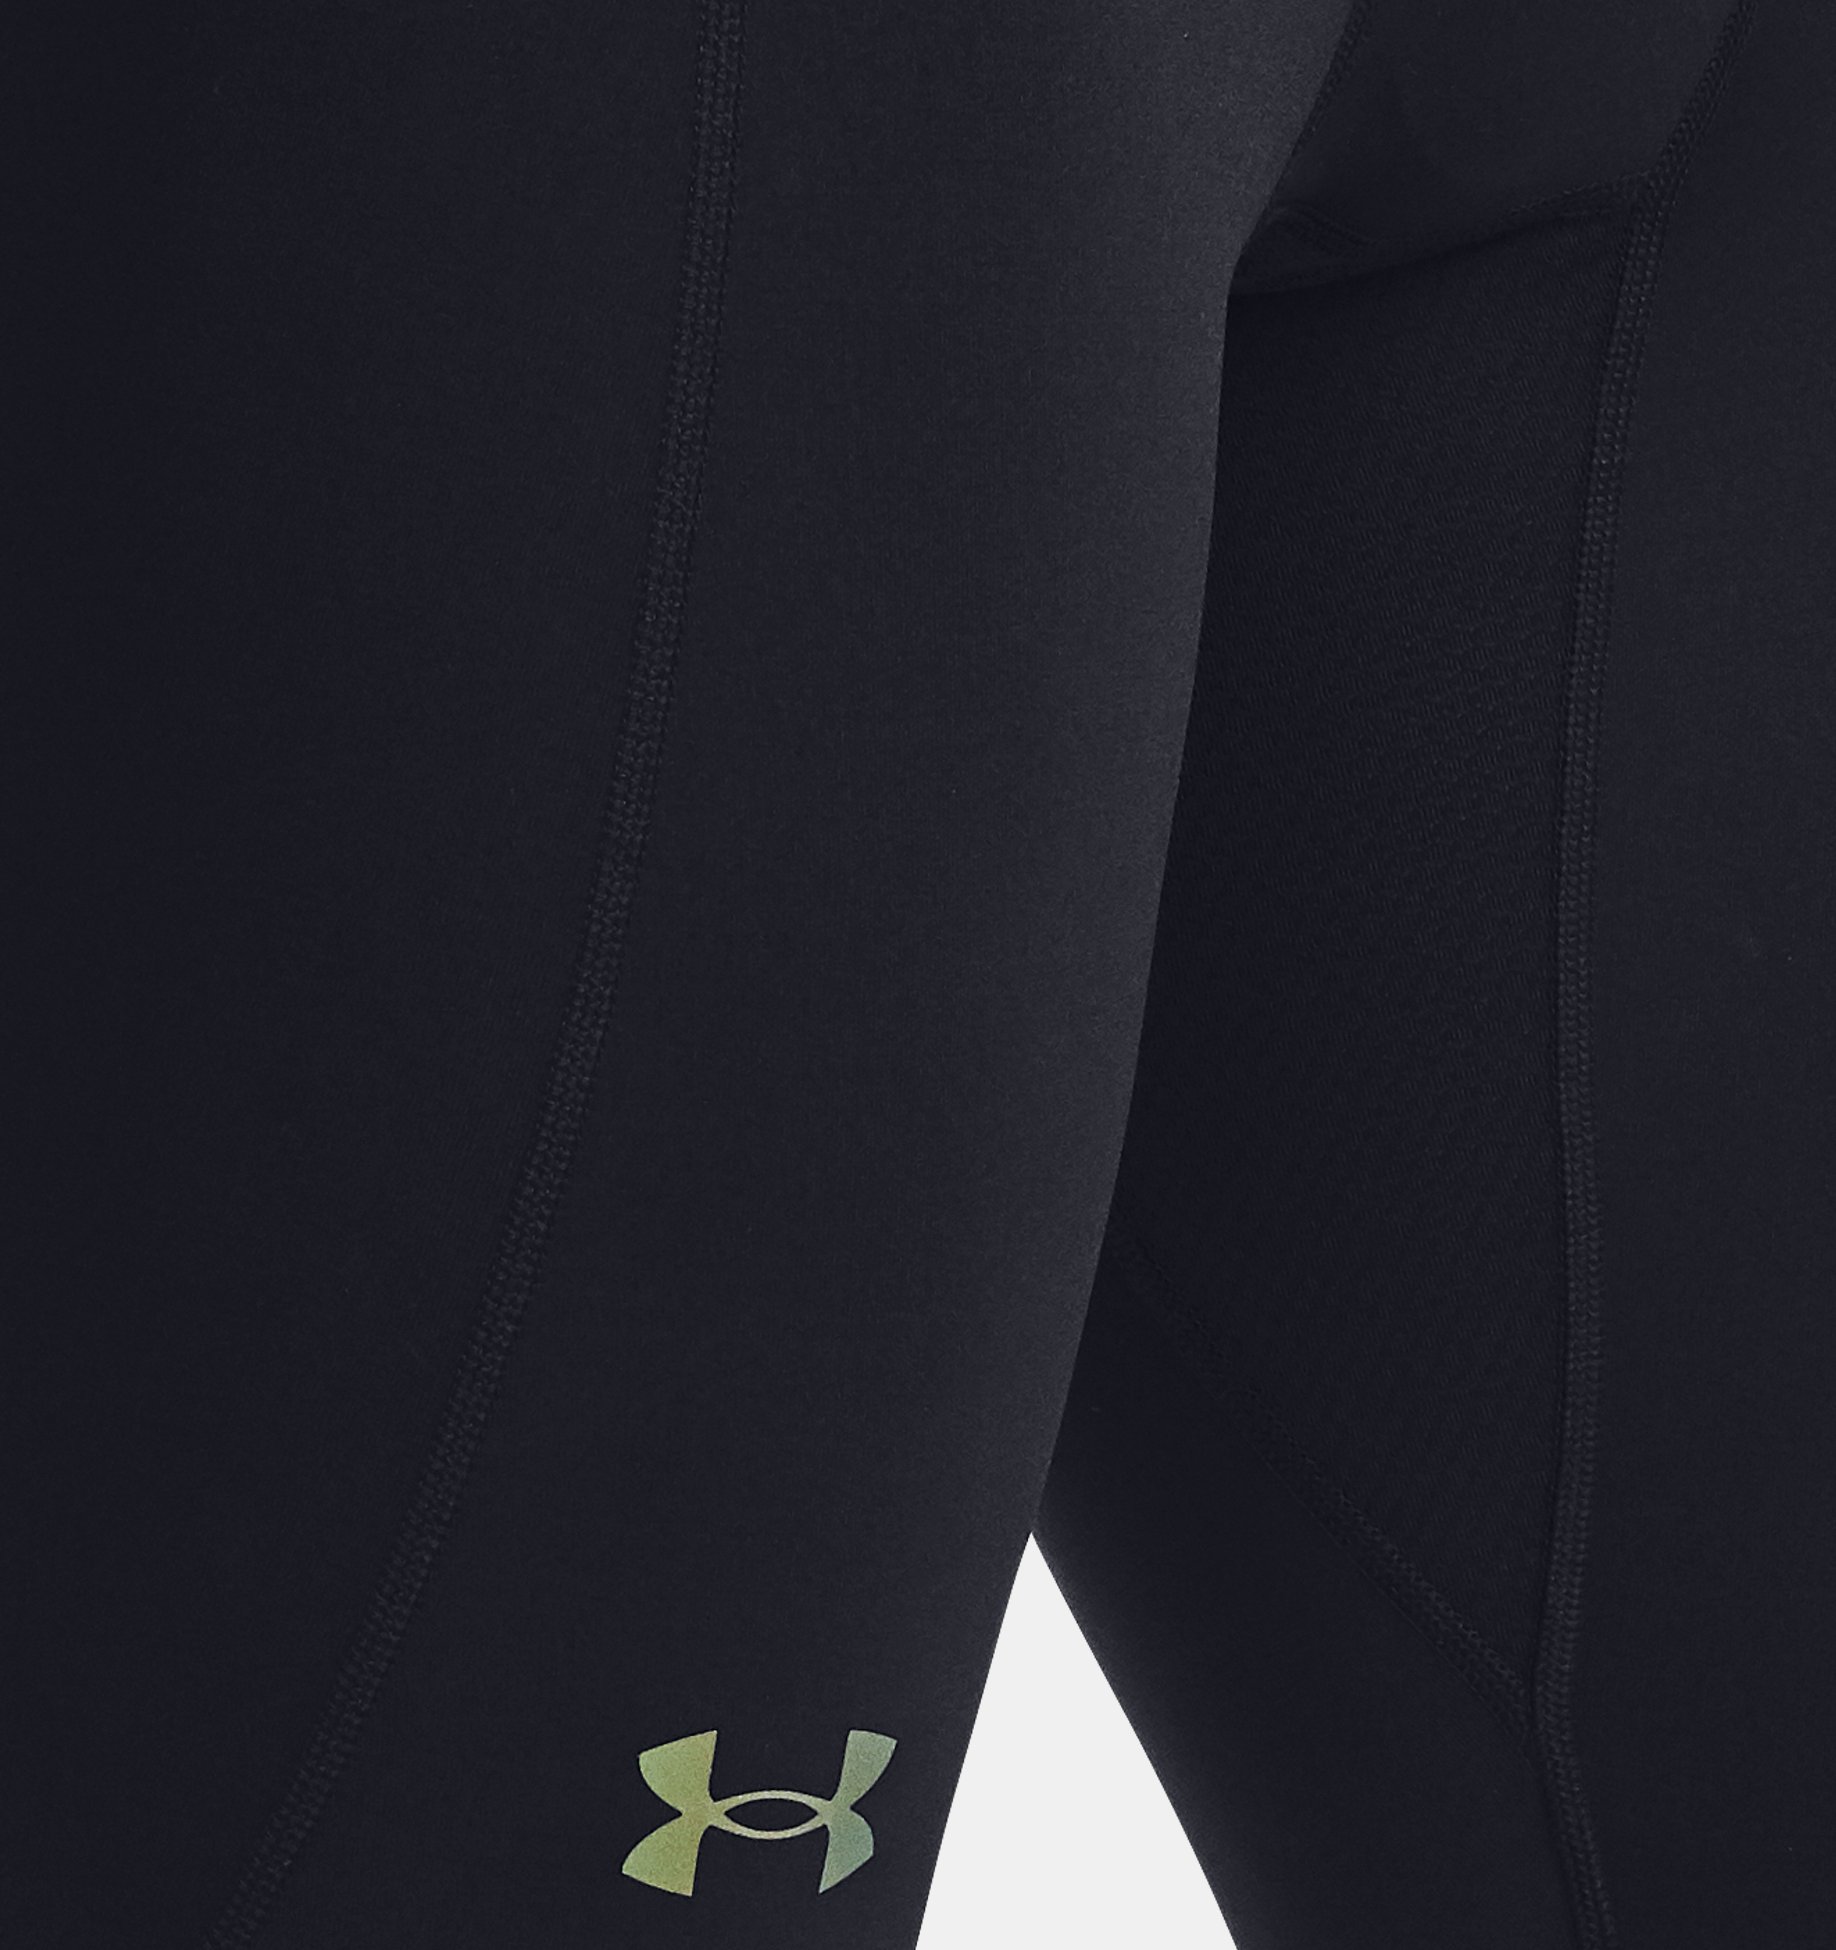 https://underarmour.scene7.com/is/image/Underarmour/V5-1356625-001_SC?rp=standard-0pad|pdpZoomDesktop&scl=0.72&fmt=jpg&qlt=85&resMode=sharp2&cache=on,on&bgc=f0f0f0&wid=1836&hei=1950&size=1500,1500